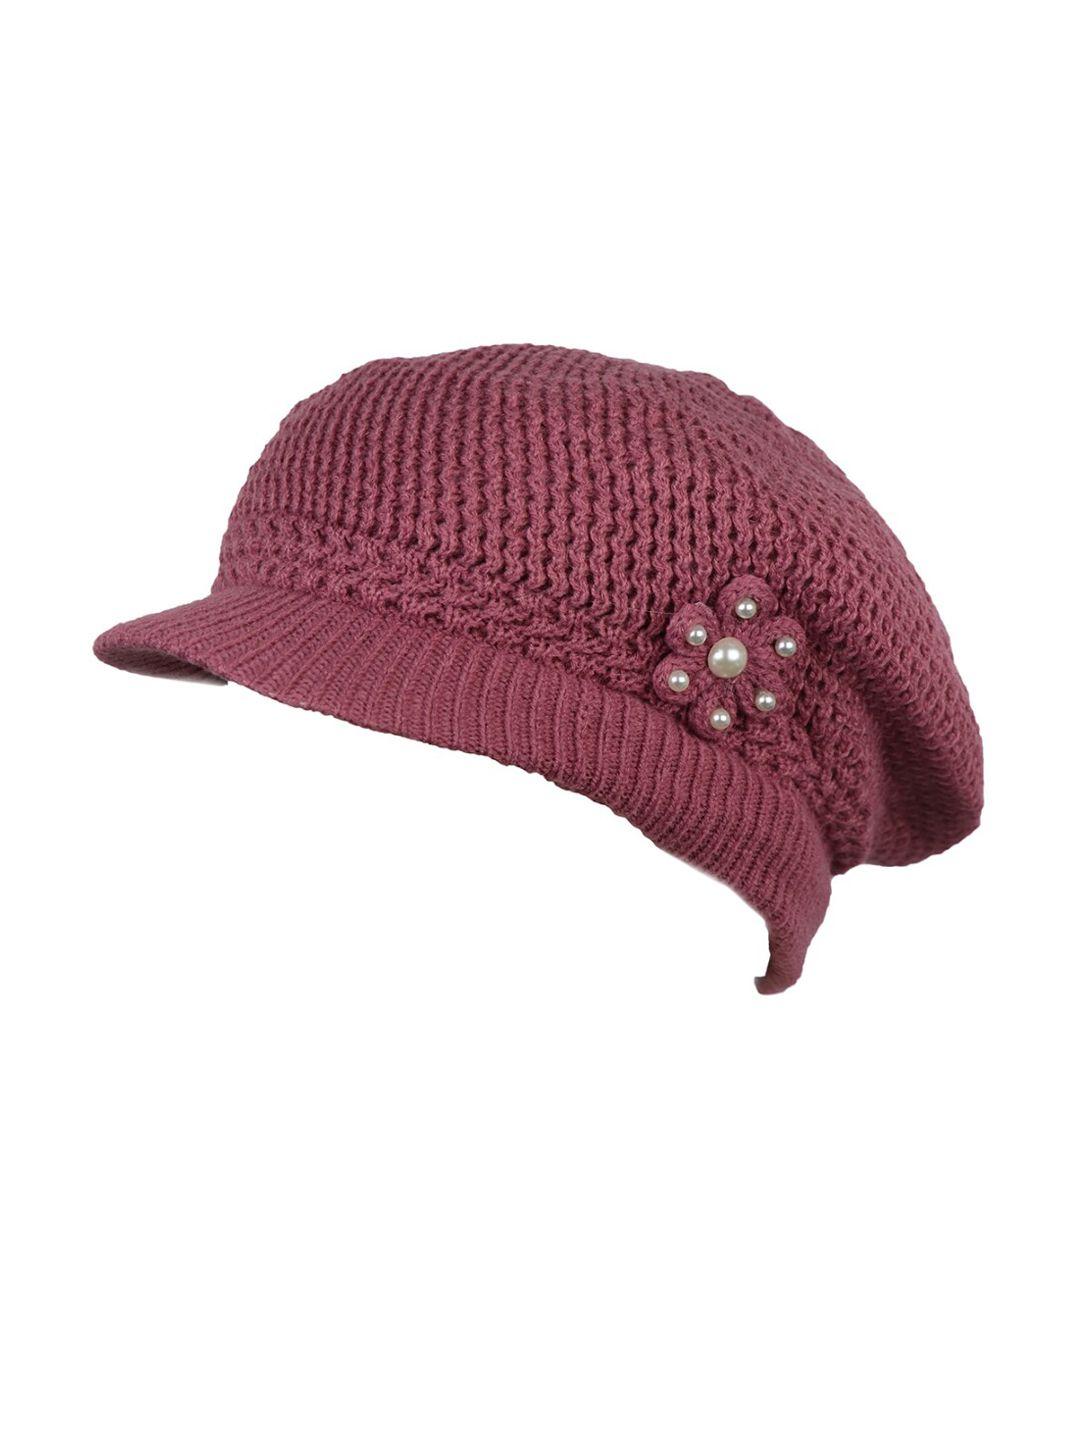 isweven unisex pink self-design beanie